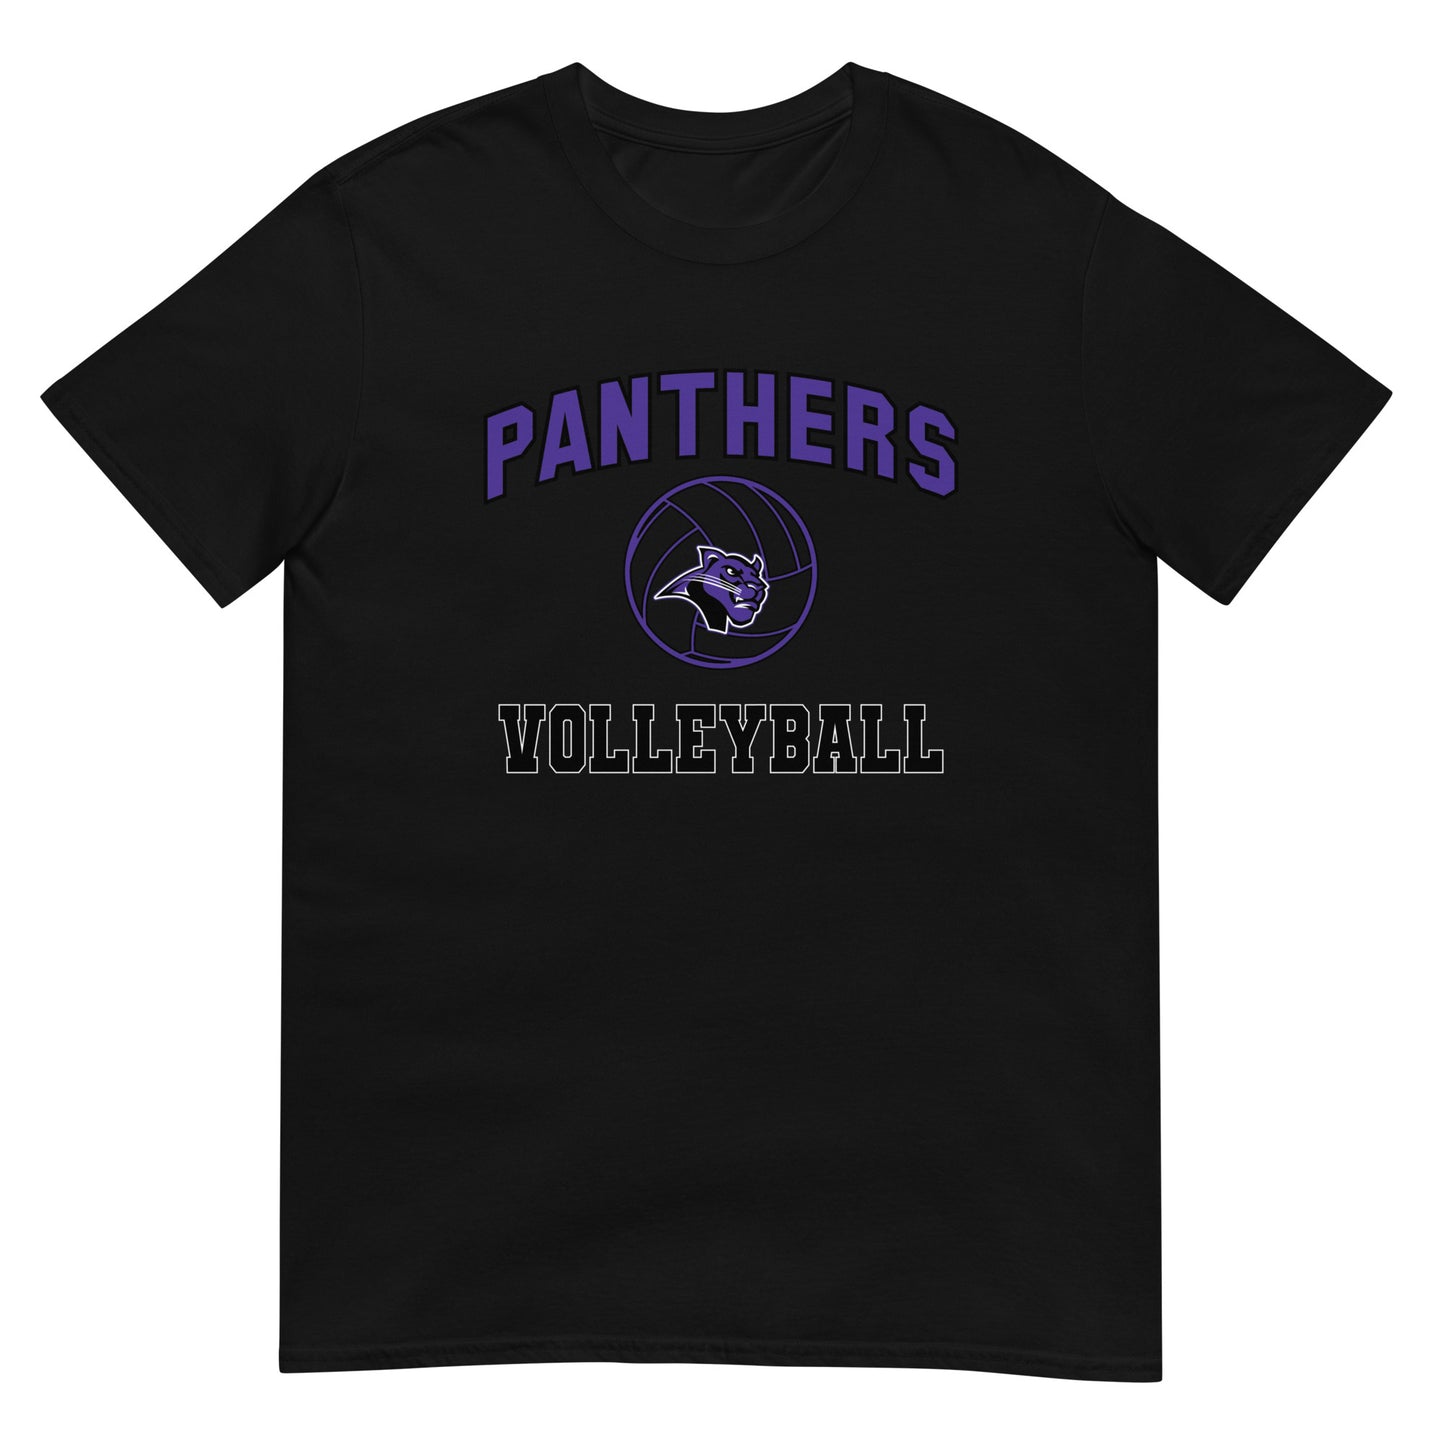 Panthers Volleyball Short-Sleeve Unisex T-Shirt